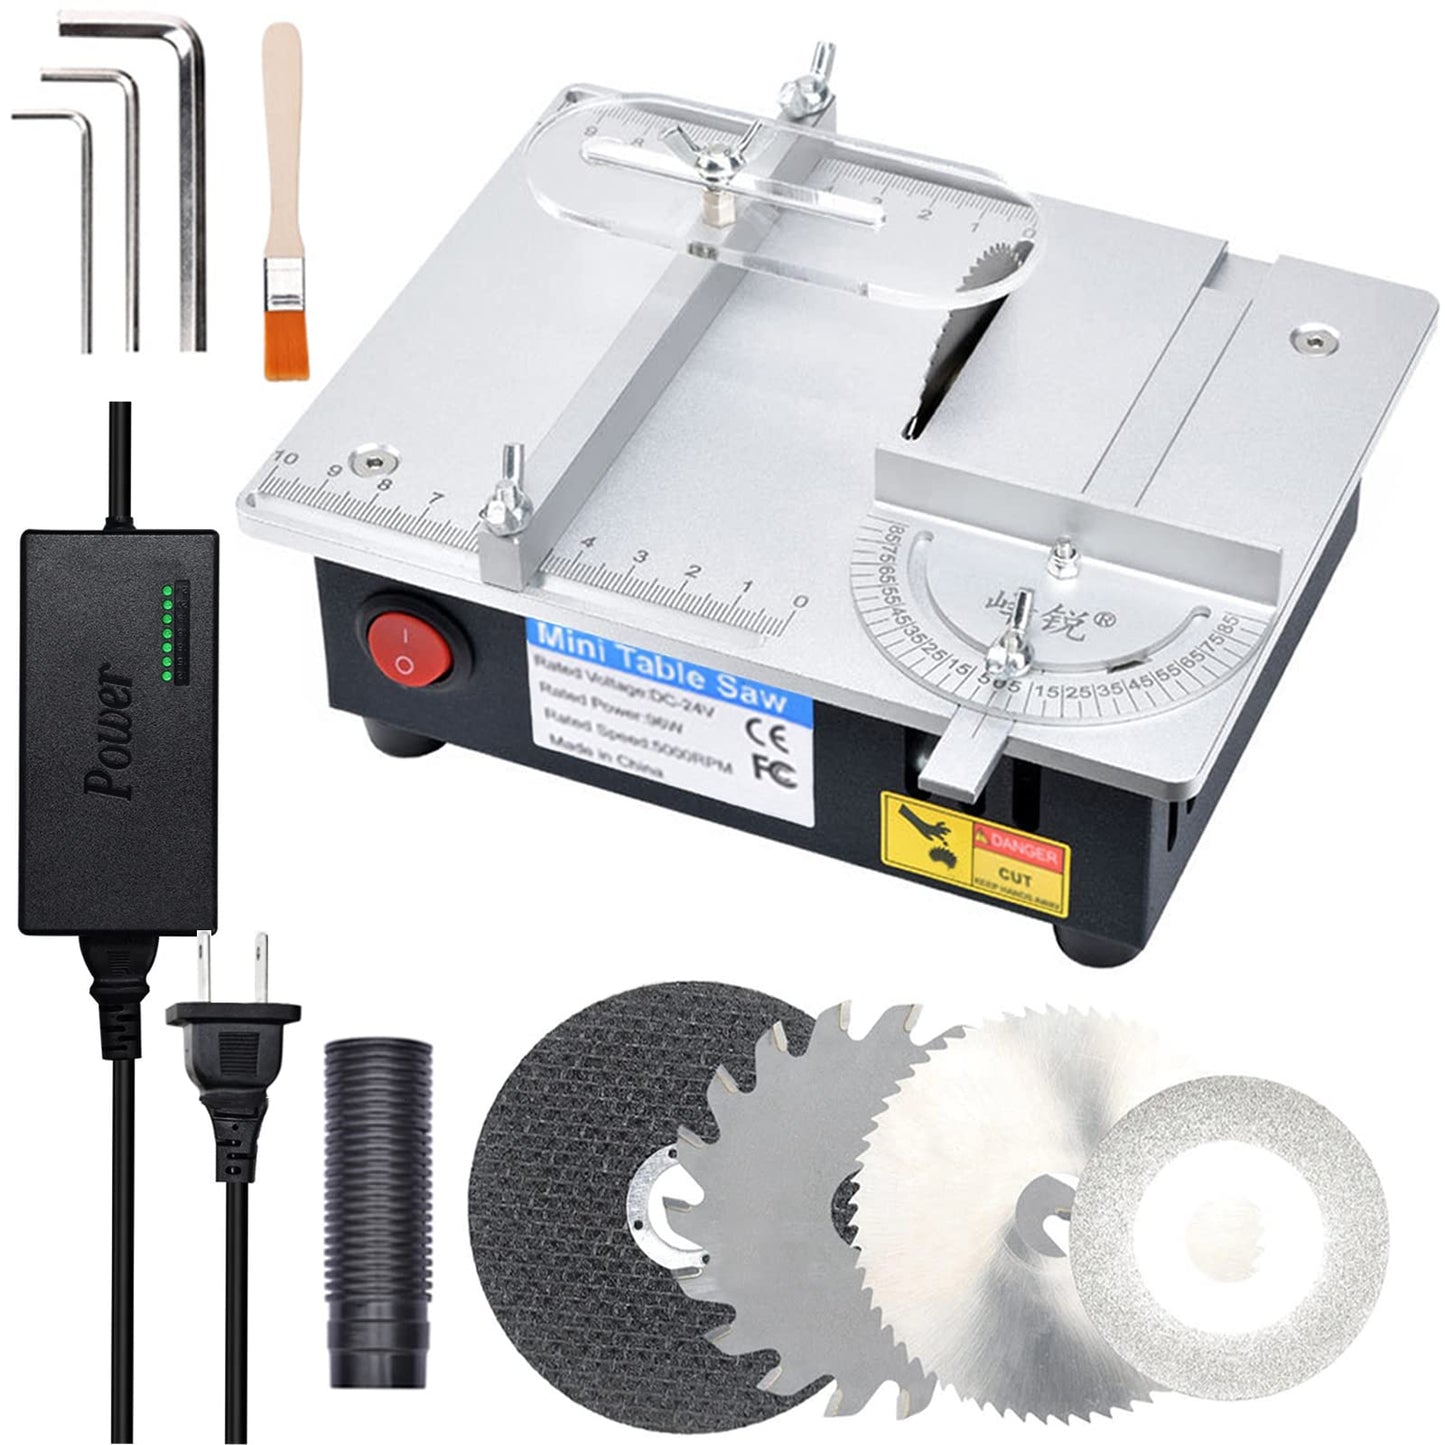 Mini Table Saw for Crafts S3 Portable Precision Table Saw,96W mini Desktop Electric Saw 7 Speed Adjustable,DIY Model Crafts Cutting Tool with 4